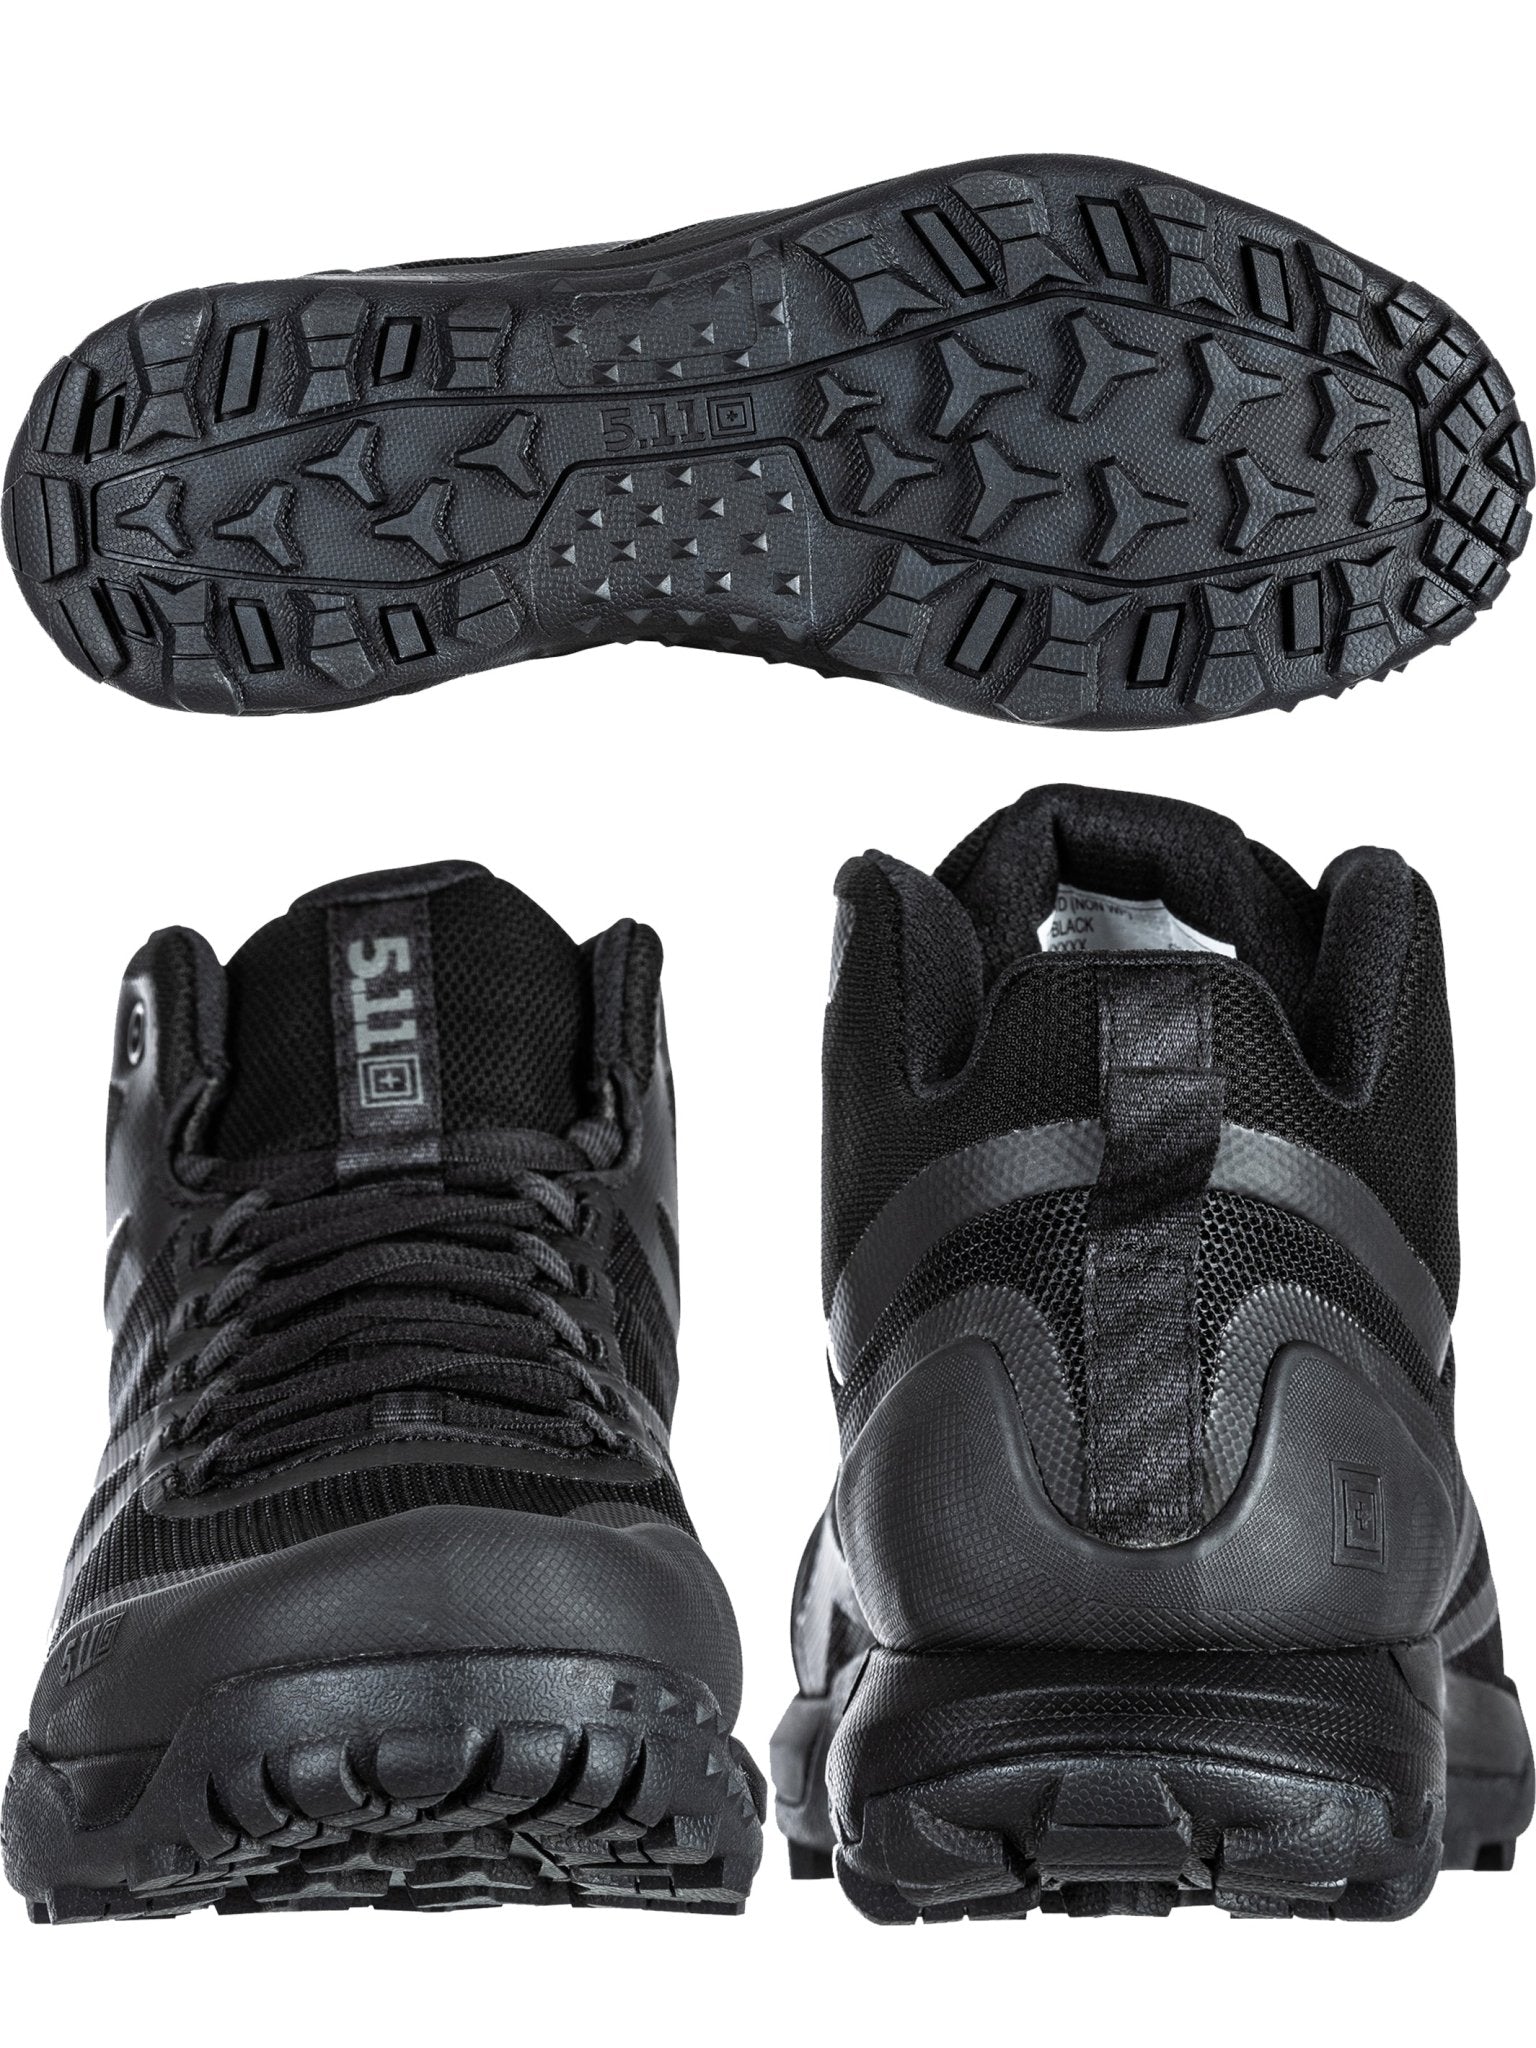 5.11 Tactical Tactical - 5.11 Tactical A/T MID Trainer with A.T.L.A.S Echo Lite EVA - Style 12430 Boots